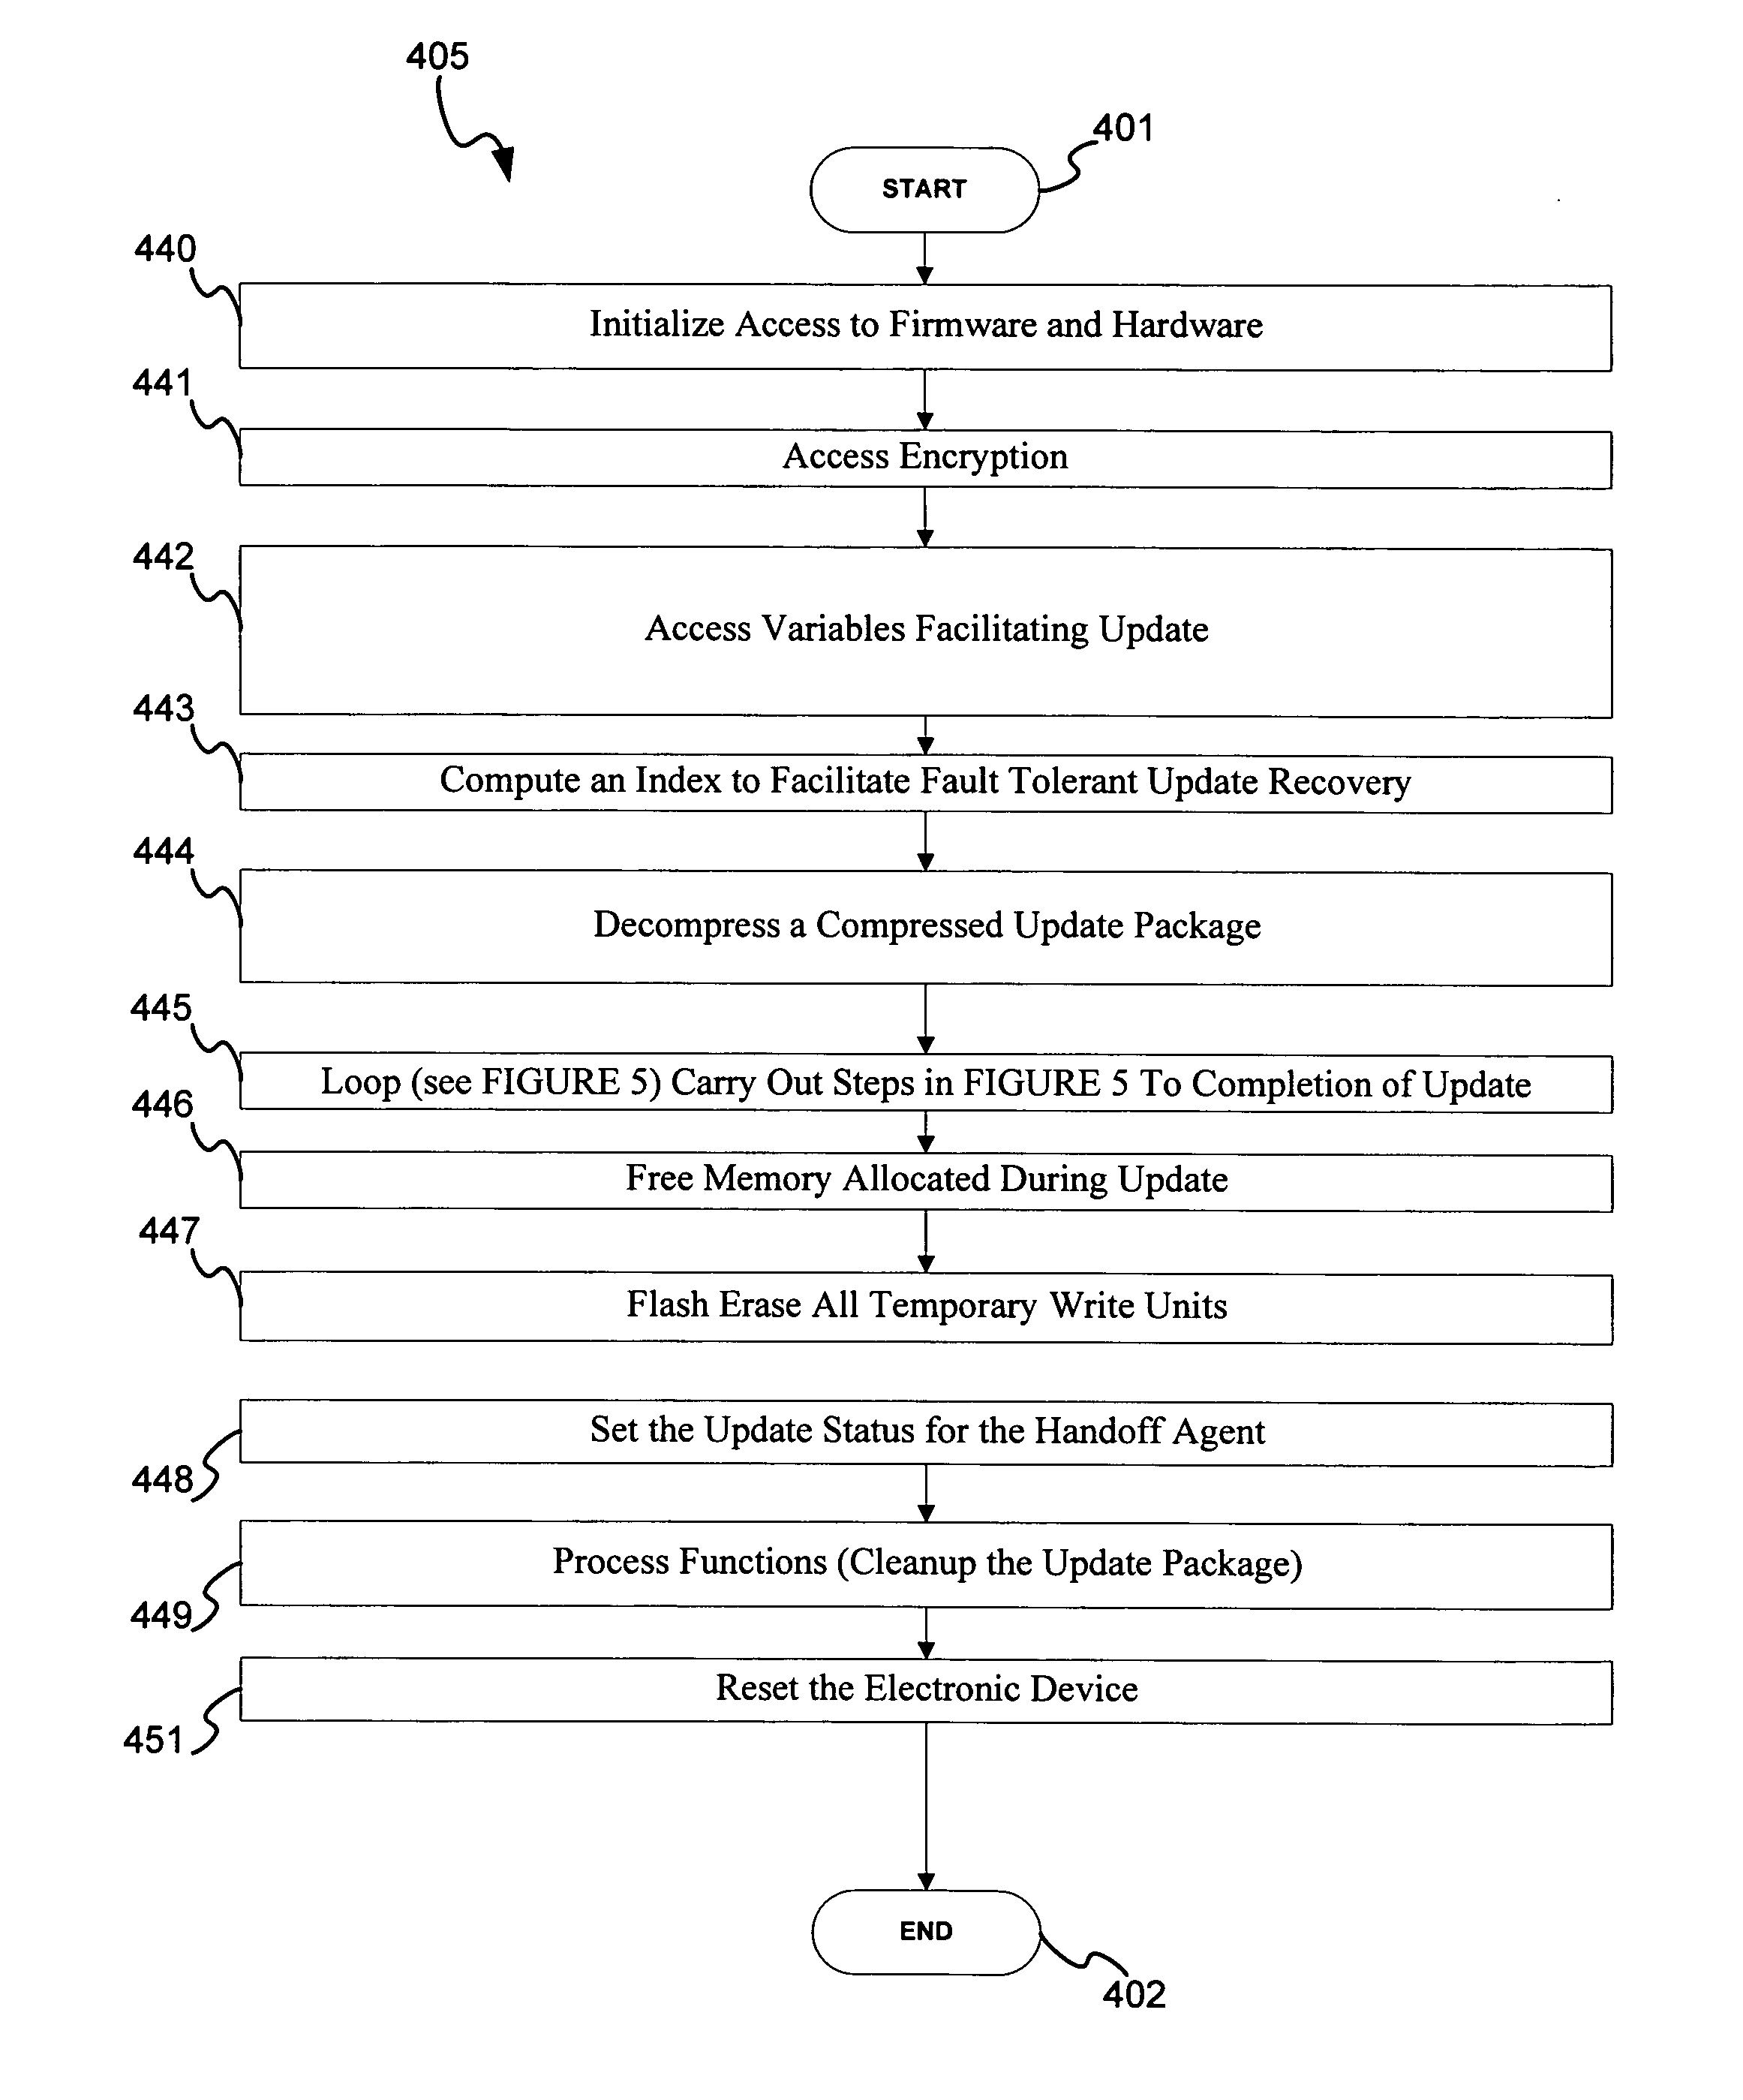 Tri-phase boot process in electronic devices